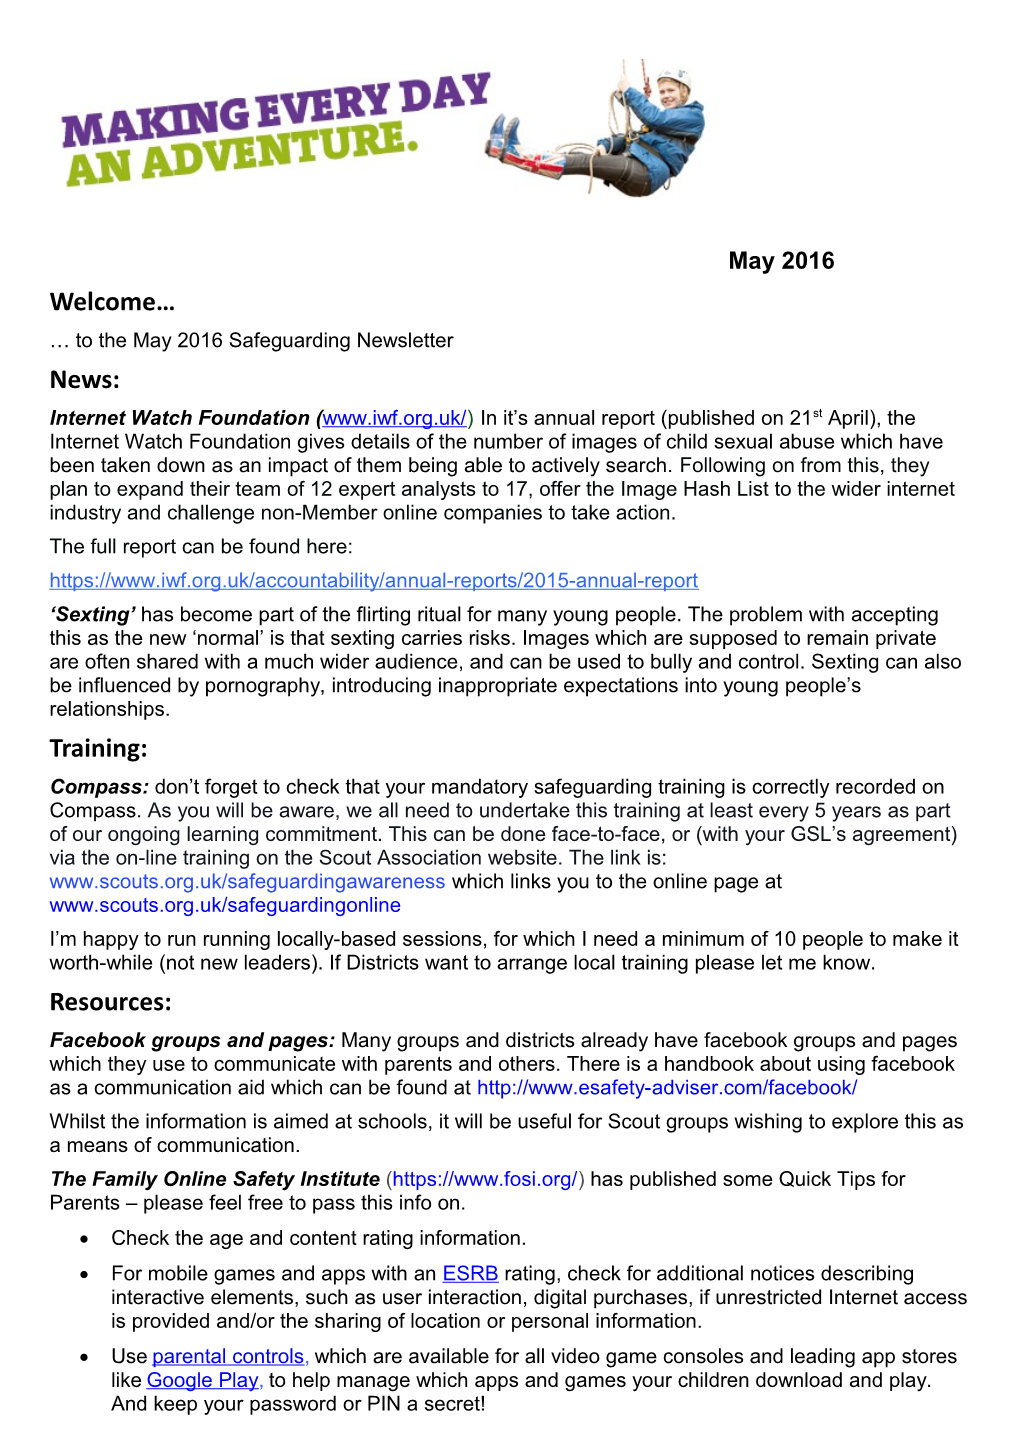 To the May 2016 Safeguarding Newsletter